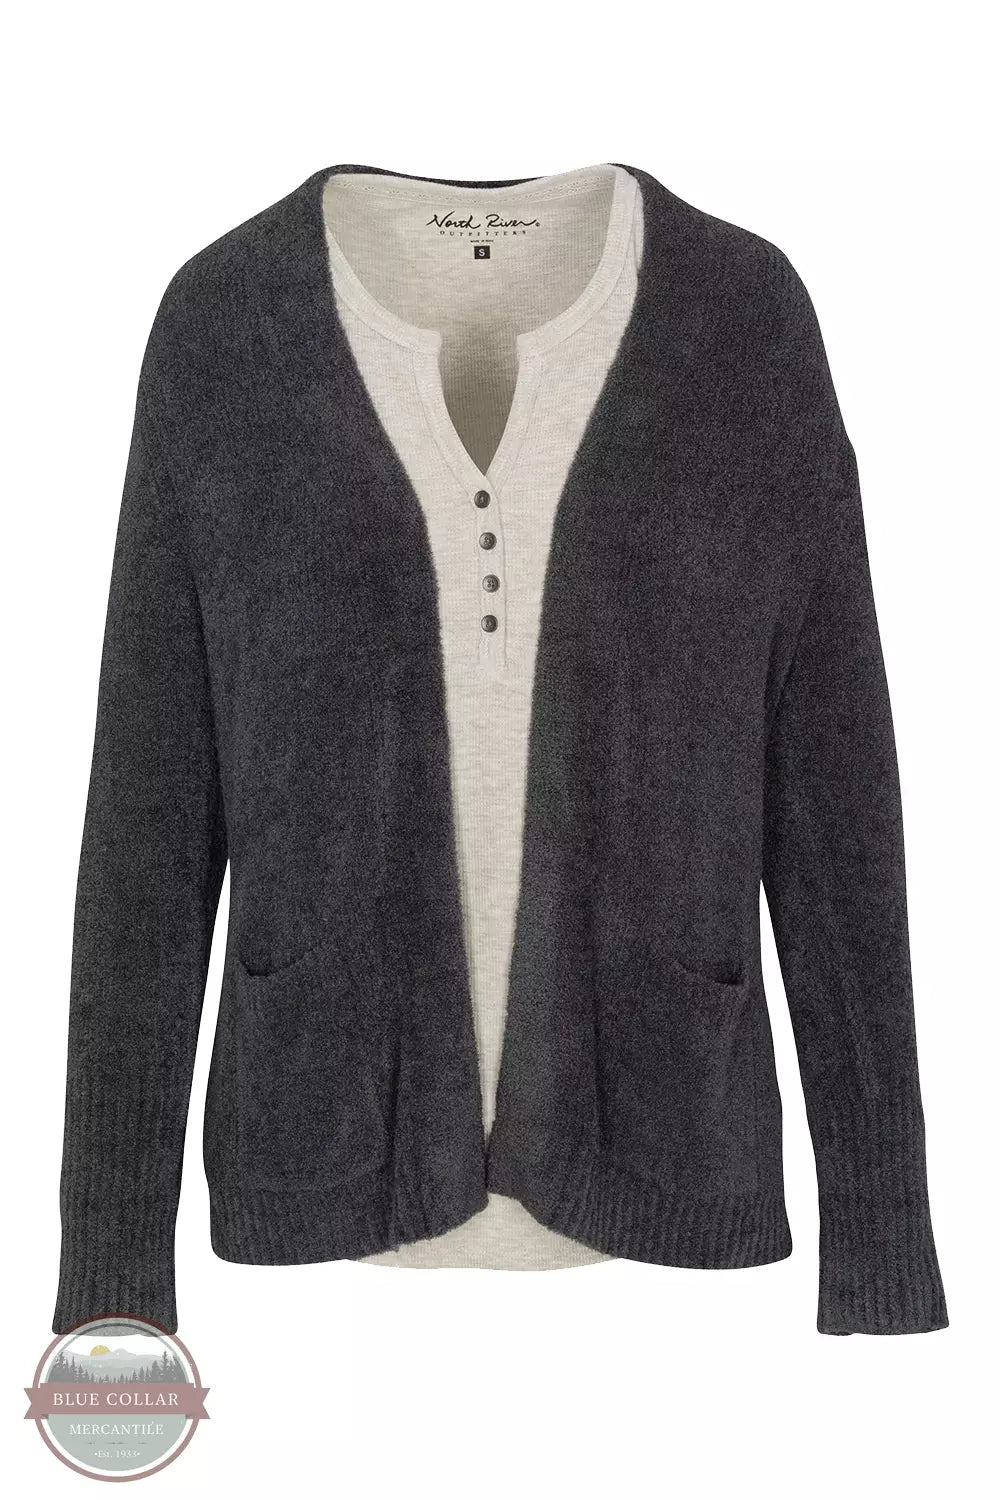 North River NRL9080 Charcoal Plush Sweater Cardigan in Charcoal Front Layered View